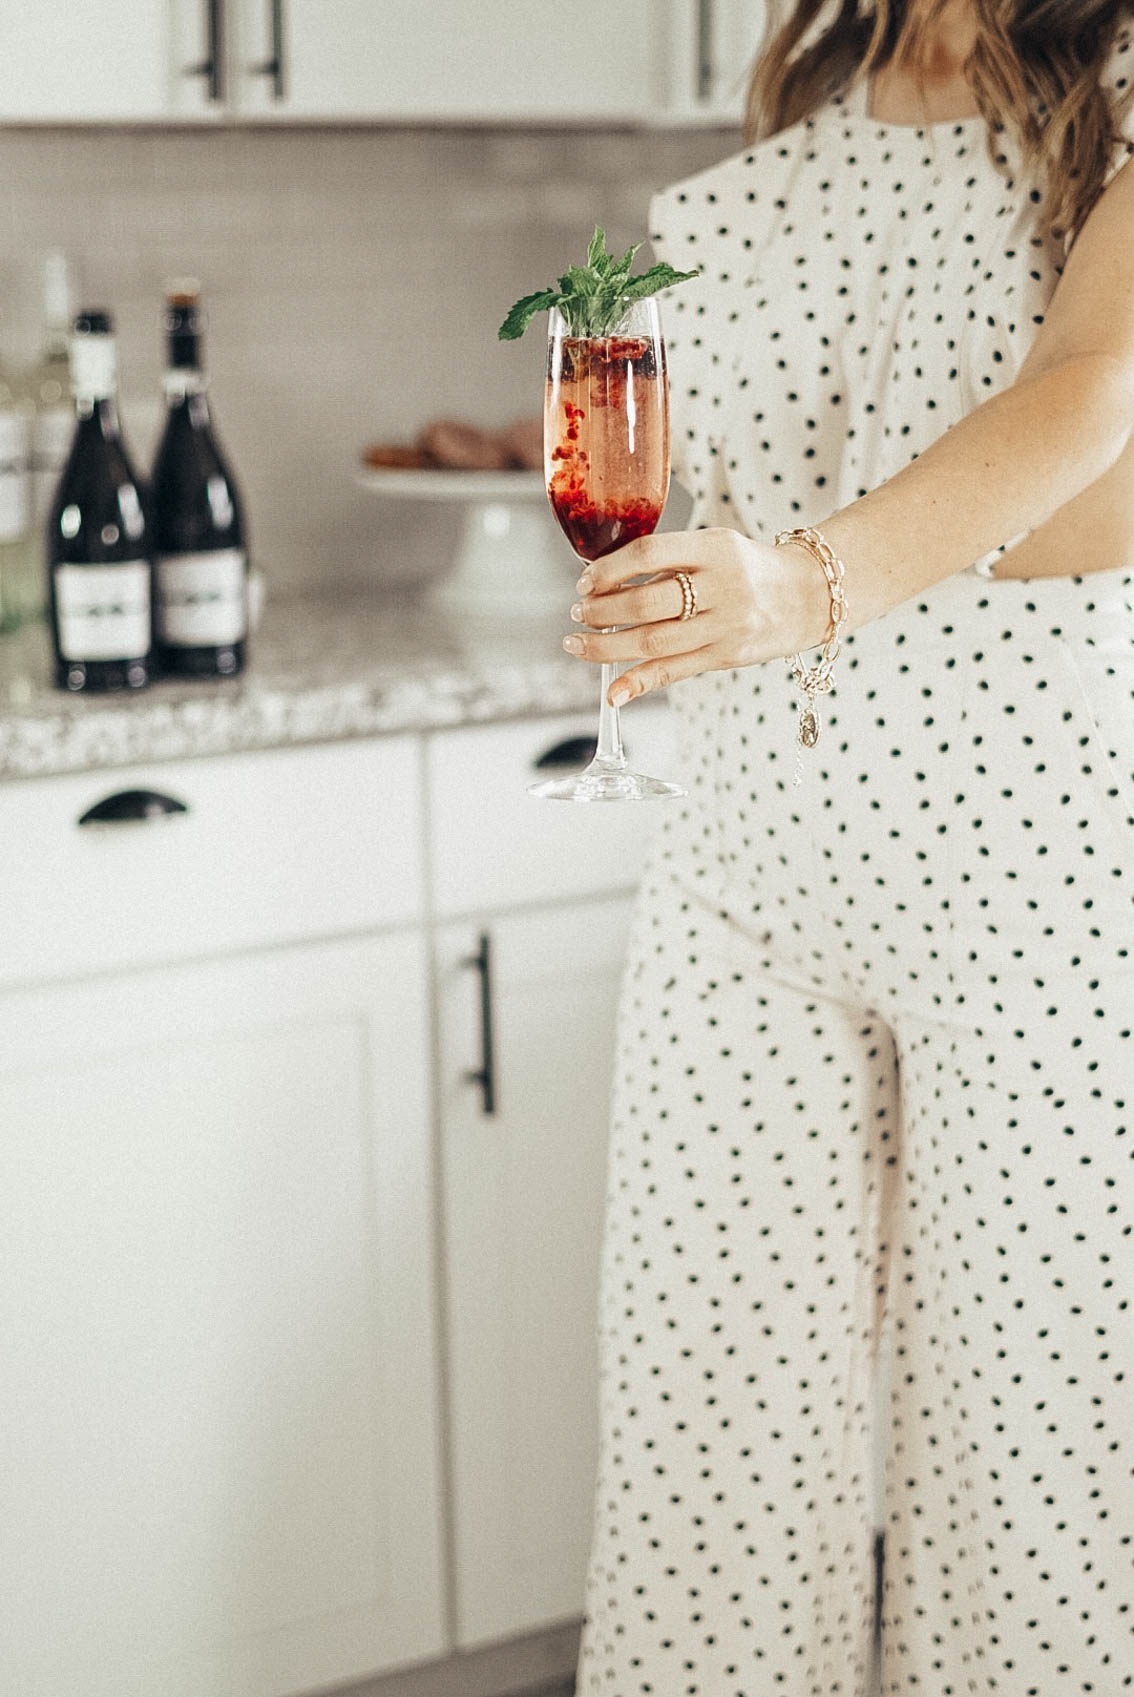 PROSECCO COCKTAIL IDEAS FOR SPRING BRUNCH